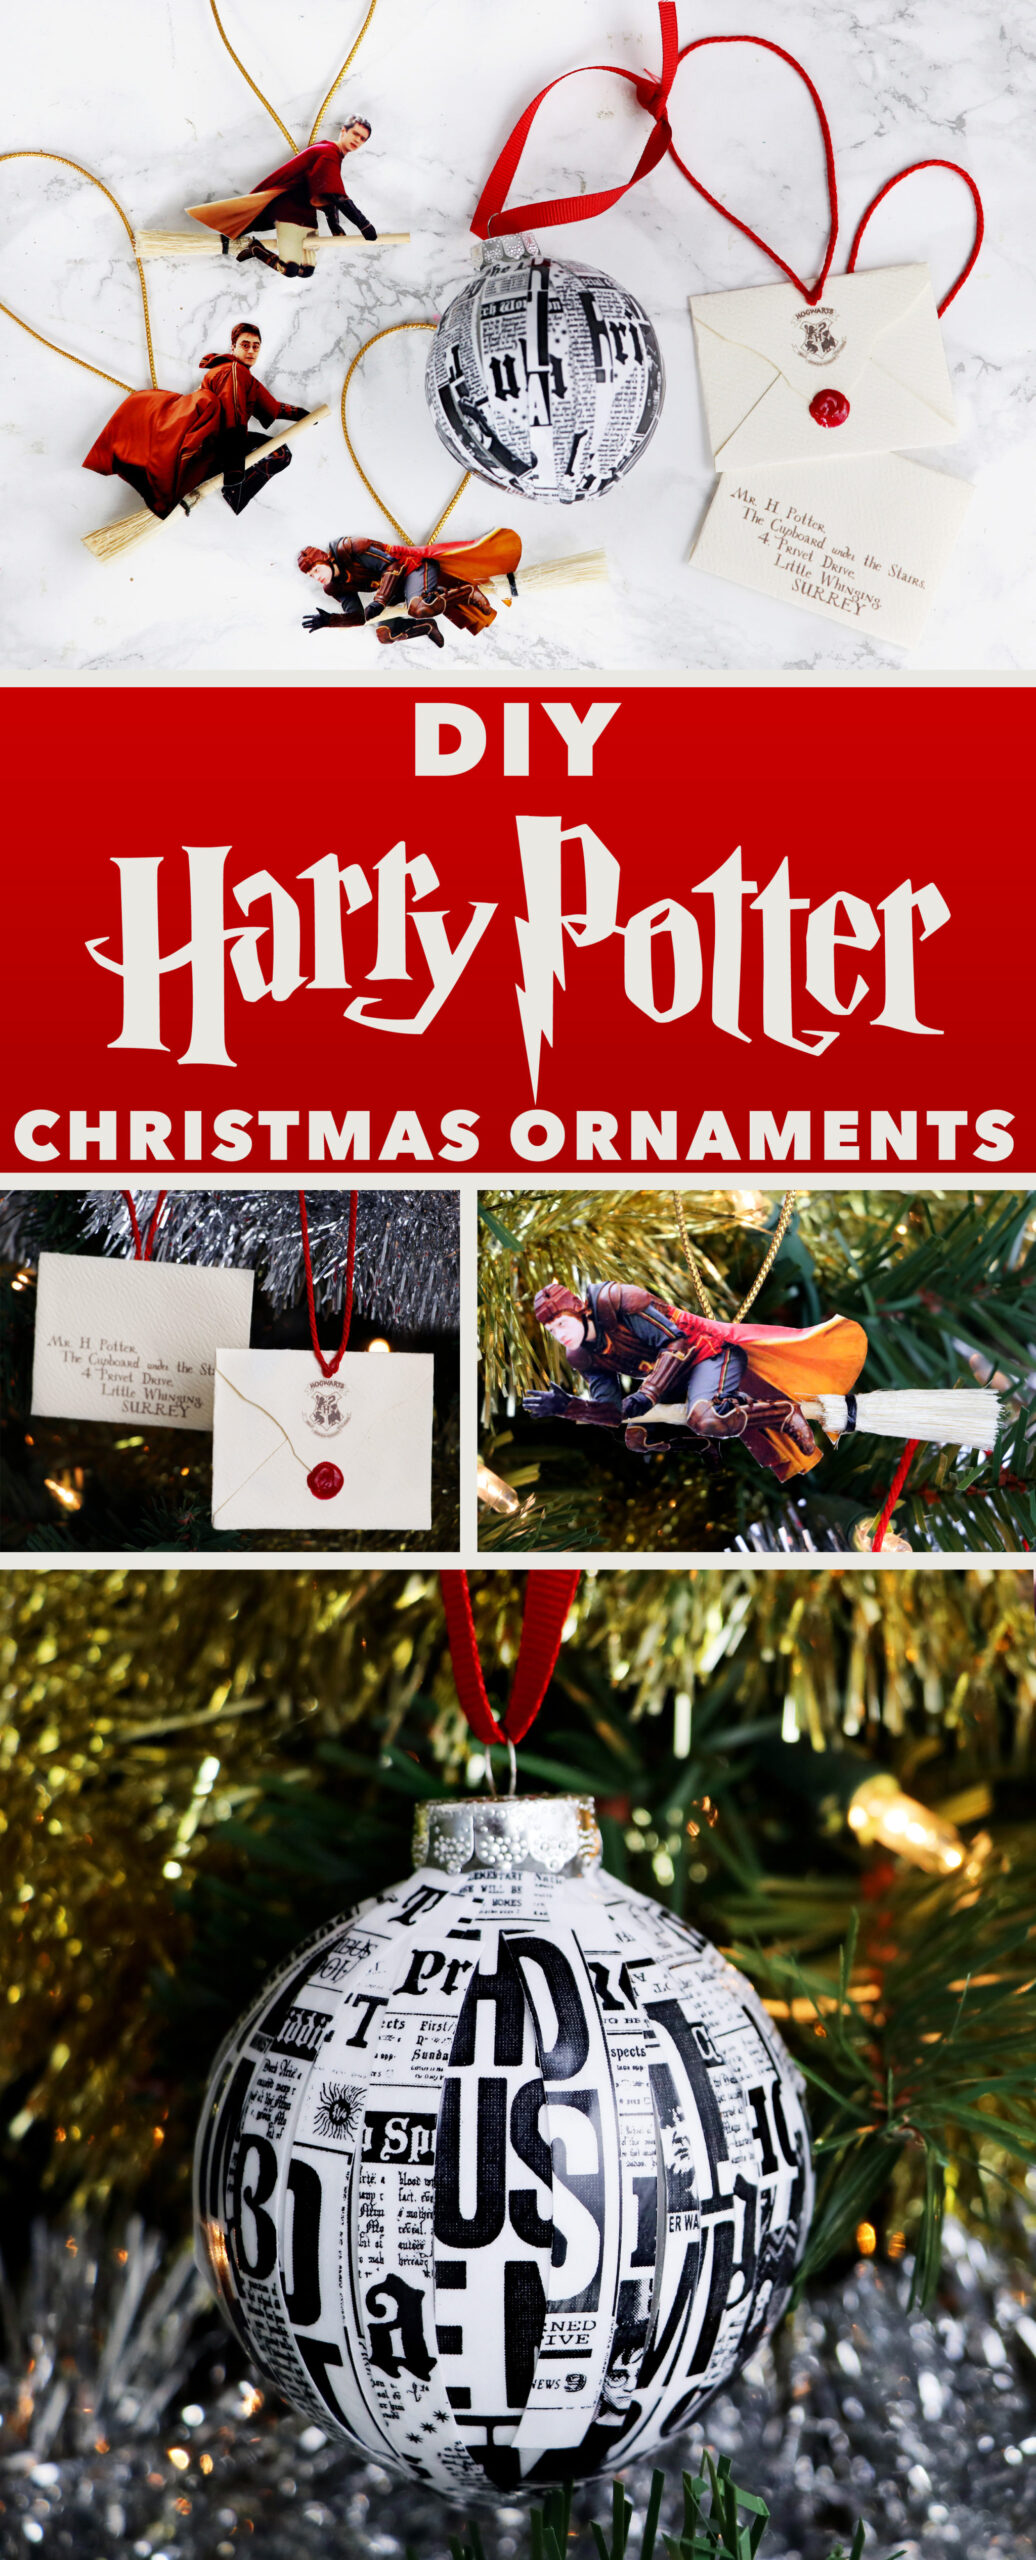 DIY Harry Potter Christmas Ornaments ~ Project For Awesome 2016